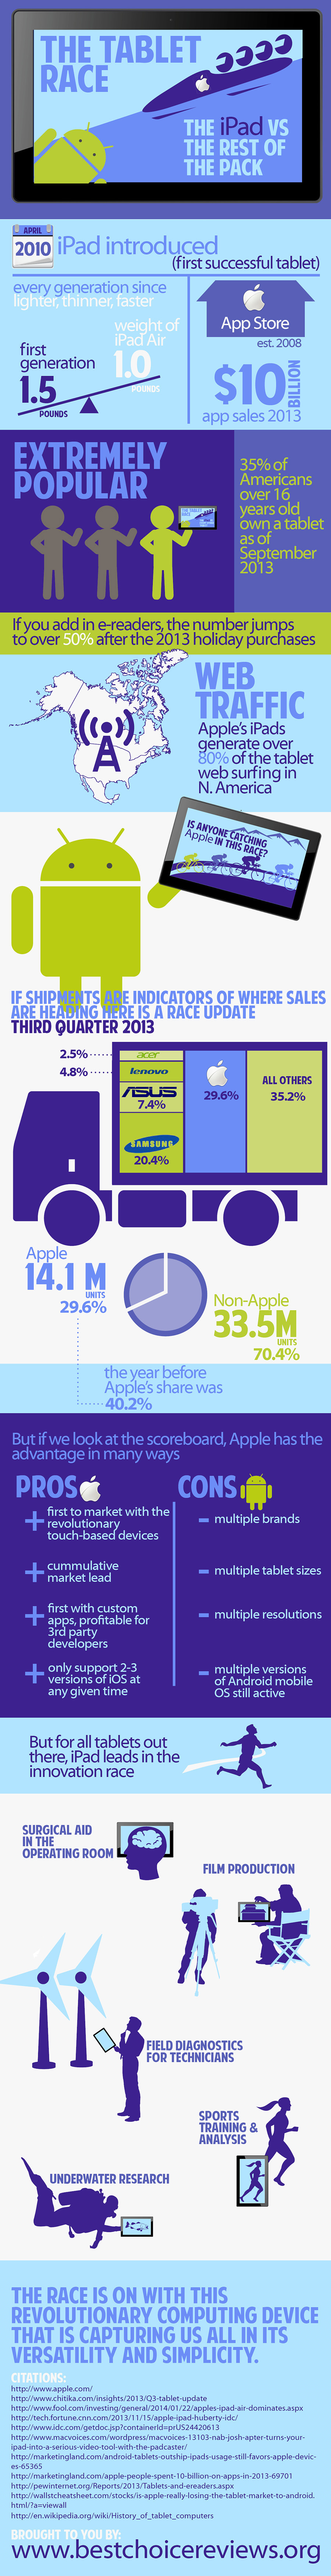 tablet race infographic